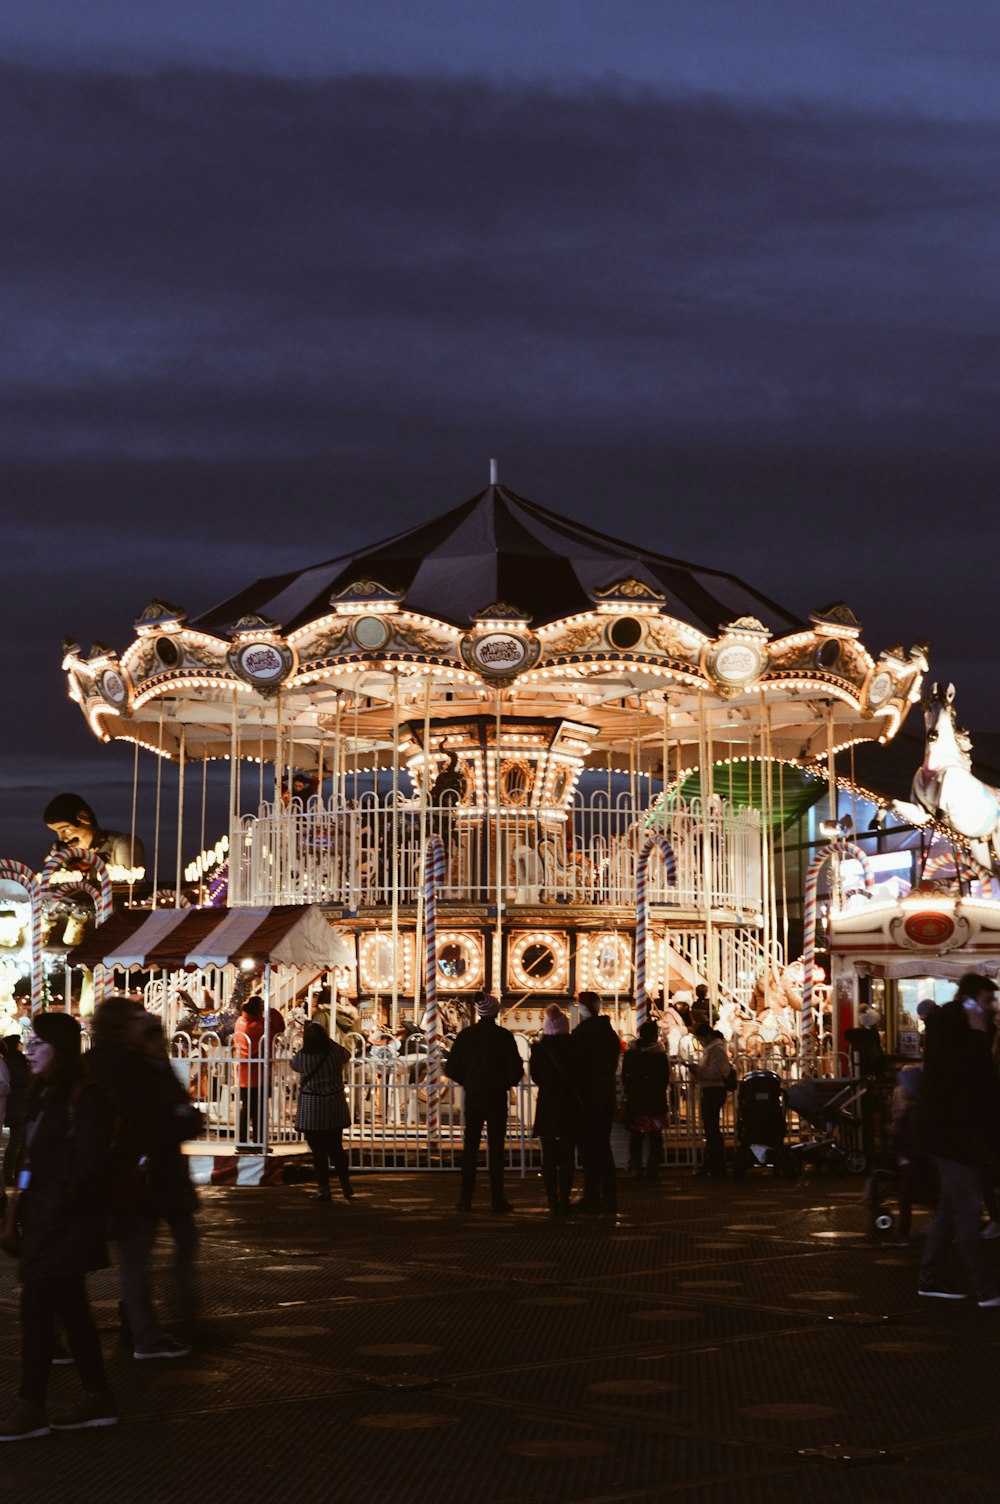 people standing by lighted merry-go-round